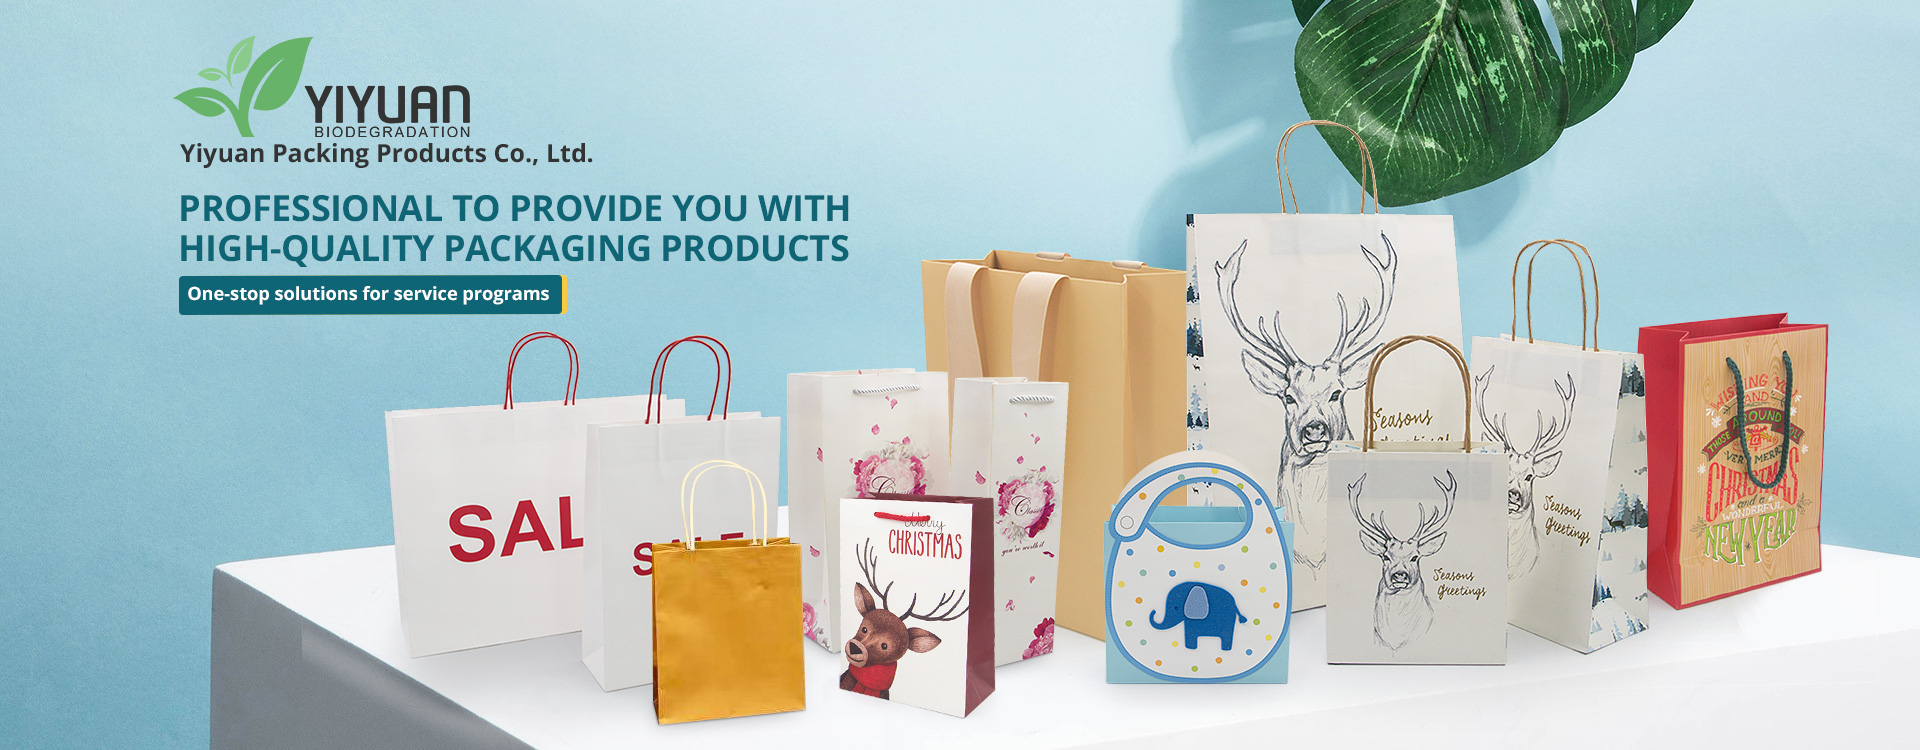 PROFESSIONAL TO PROVIDE YOU WITH HIGH-QUALITY PACKAGING PRODUCTS